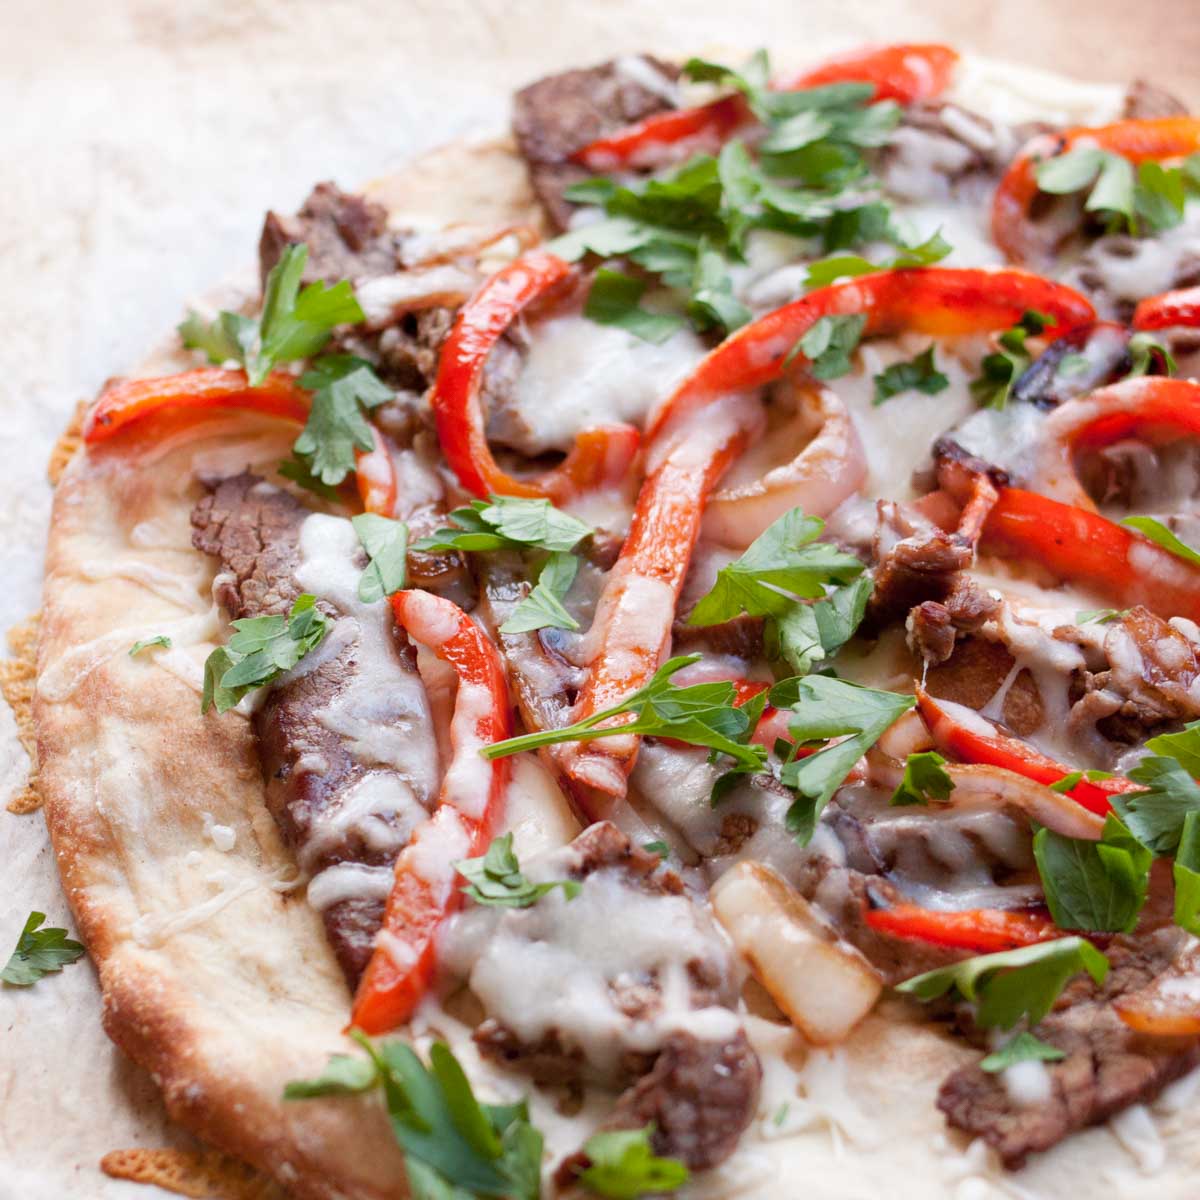 A flatbread pizza with strips of steak and red peppers is covered in melted cheese and fresh parsley.